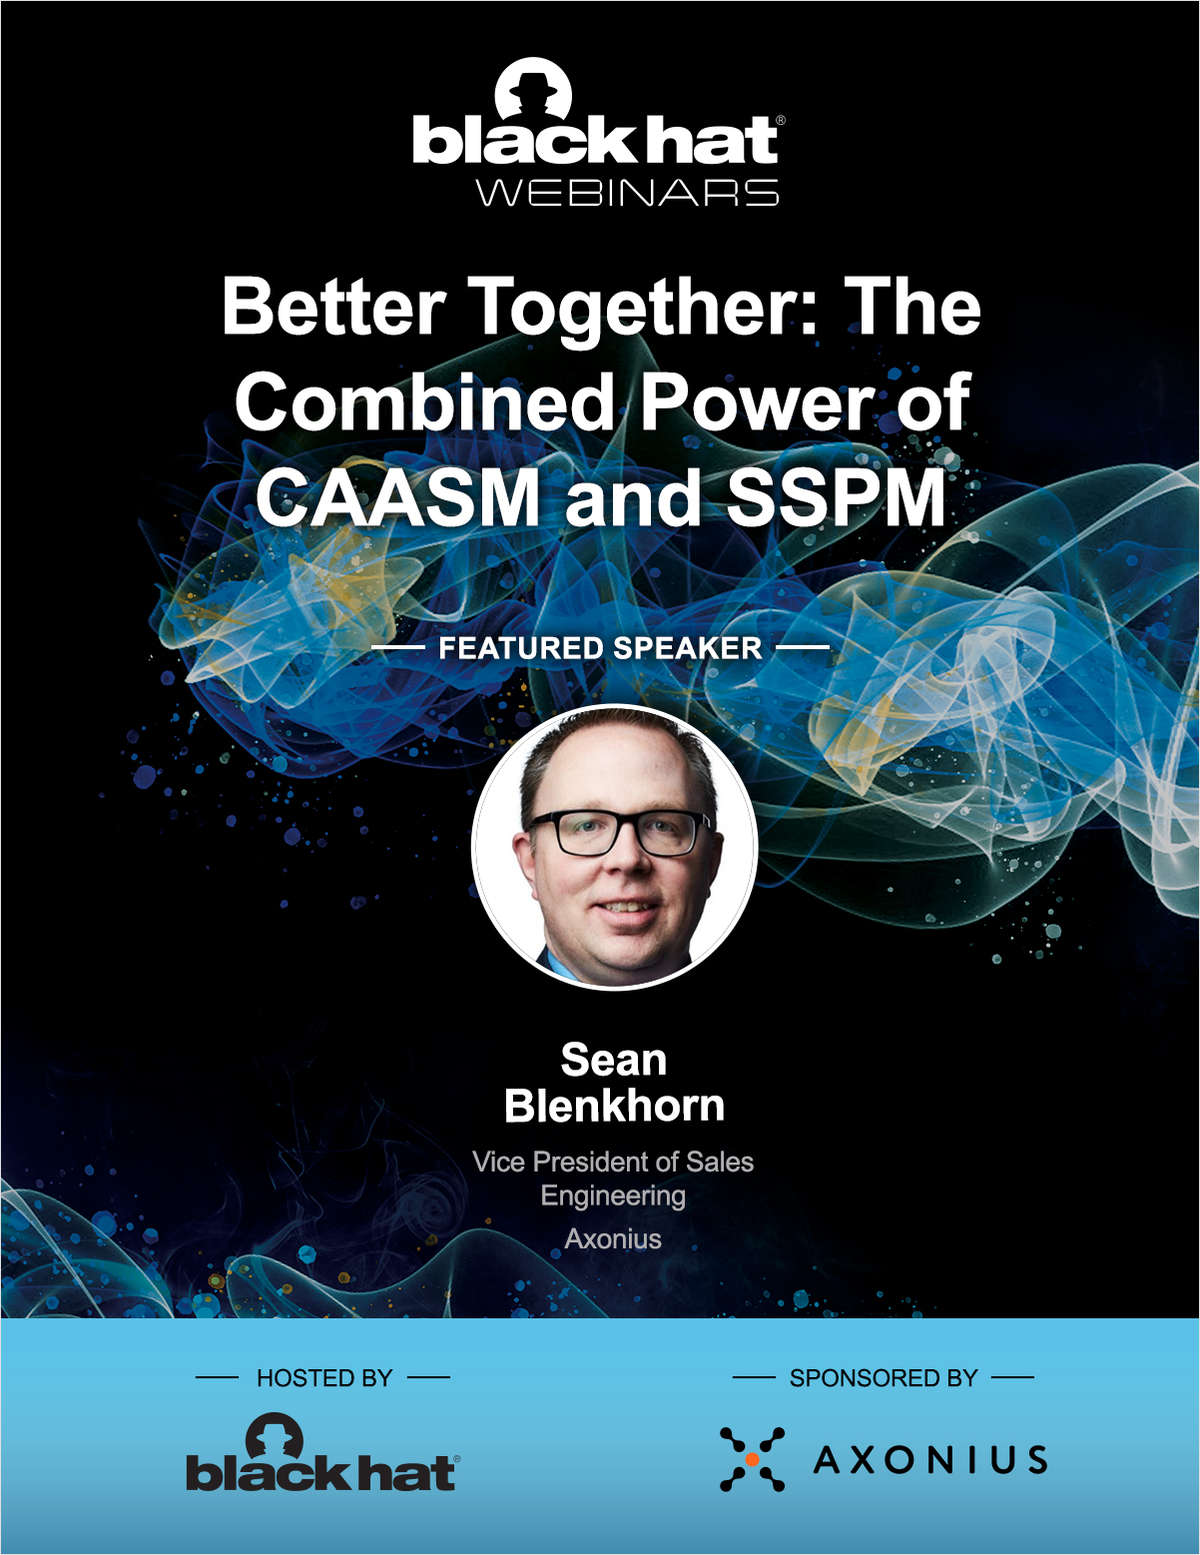 Better Together: The Combined Power of CAASM and SSPM